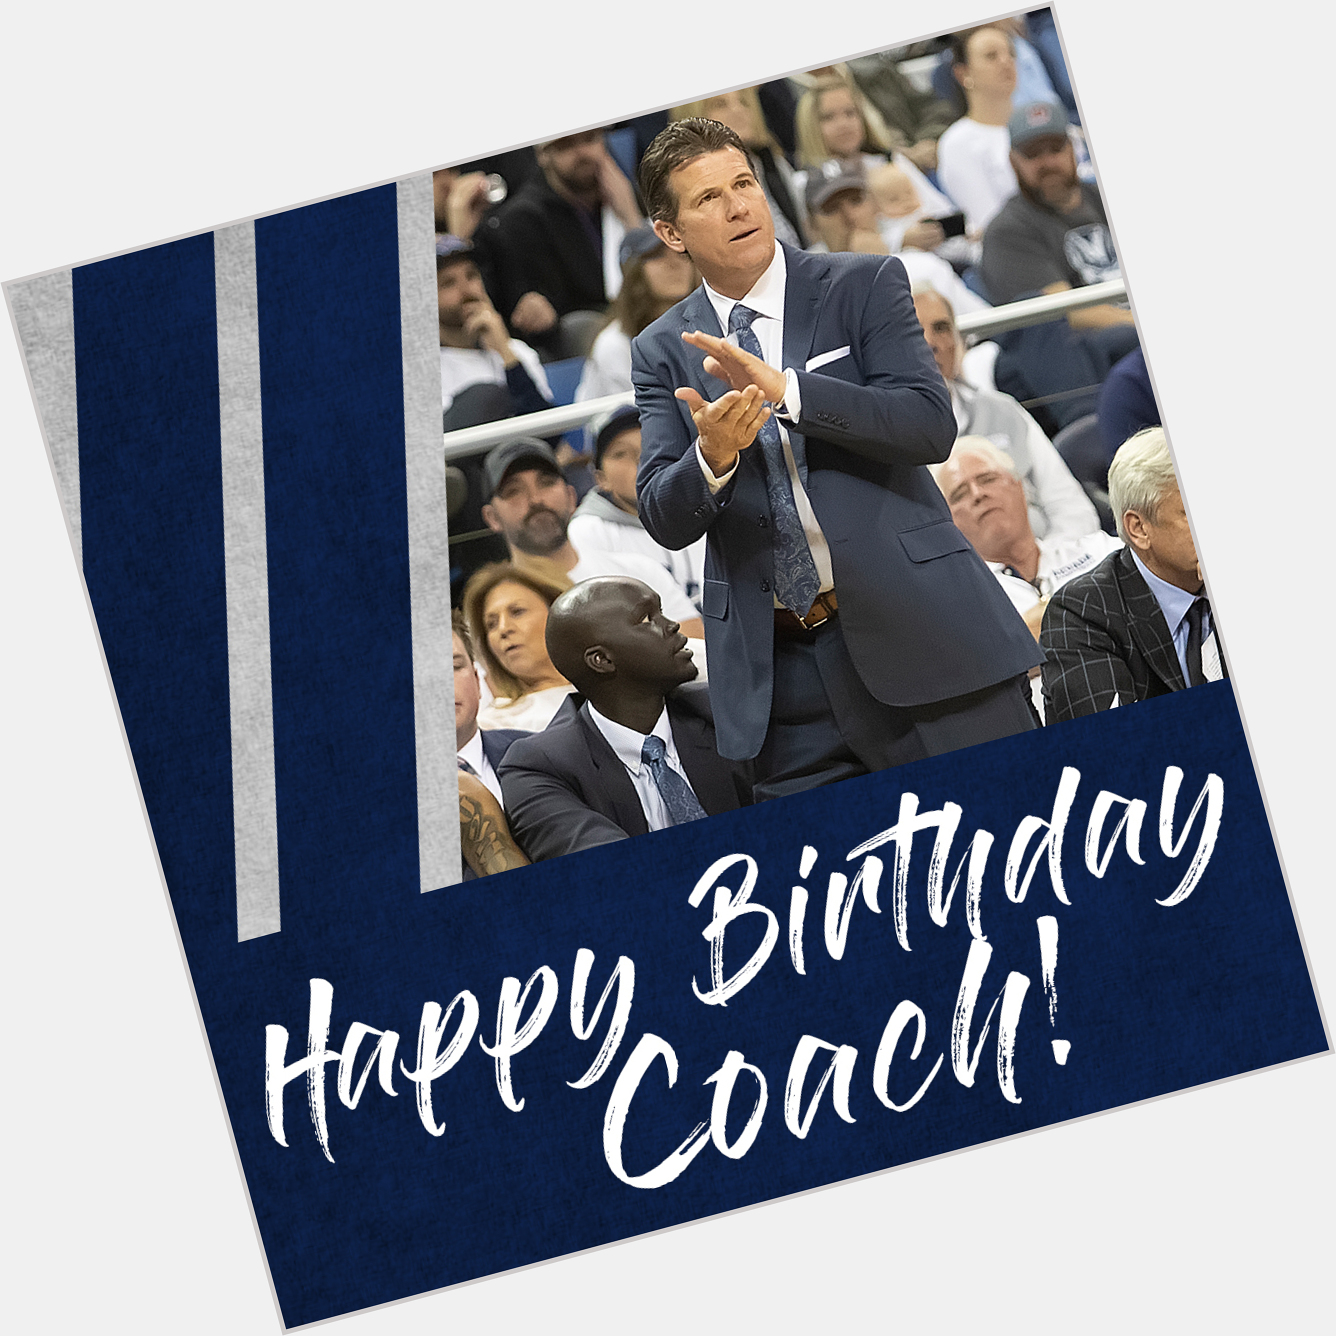  Wishing a Happy Birthday to our head coach, Steve Alford!  